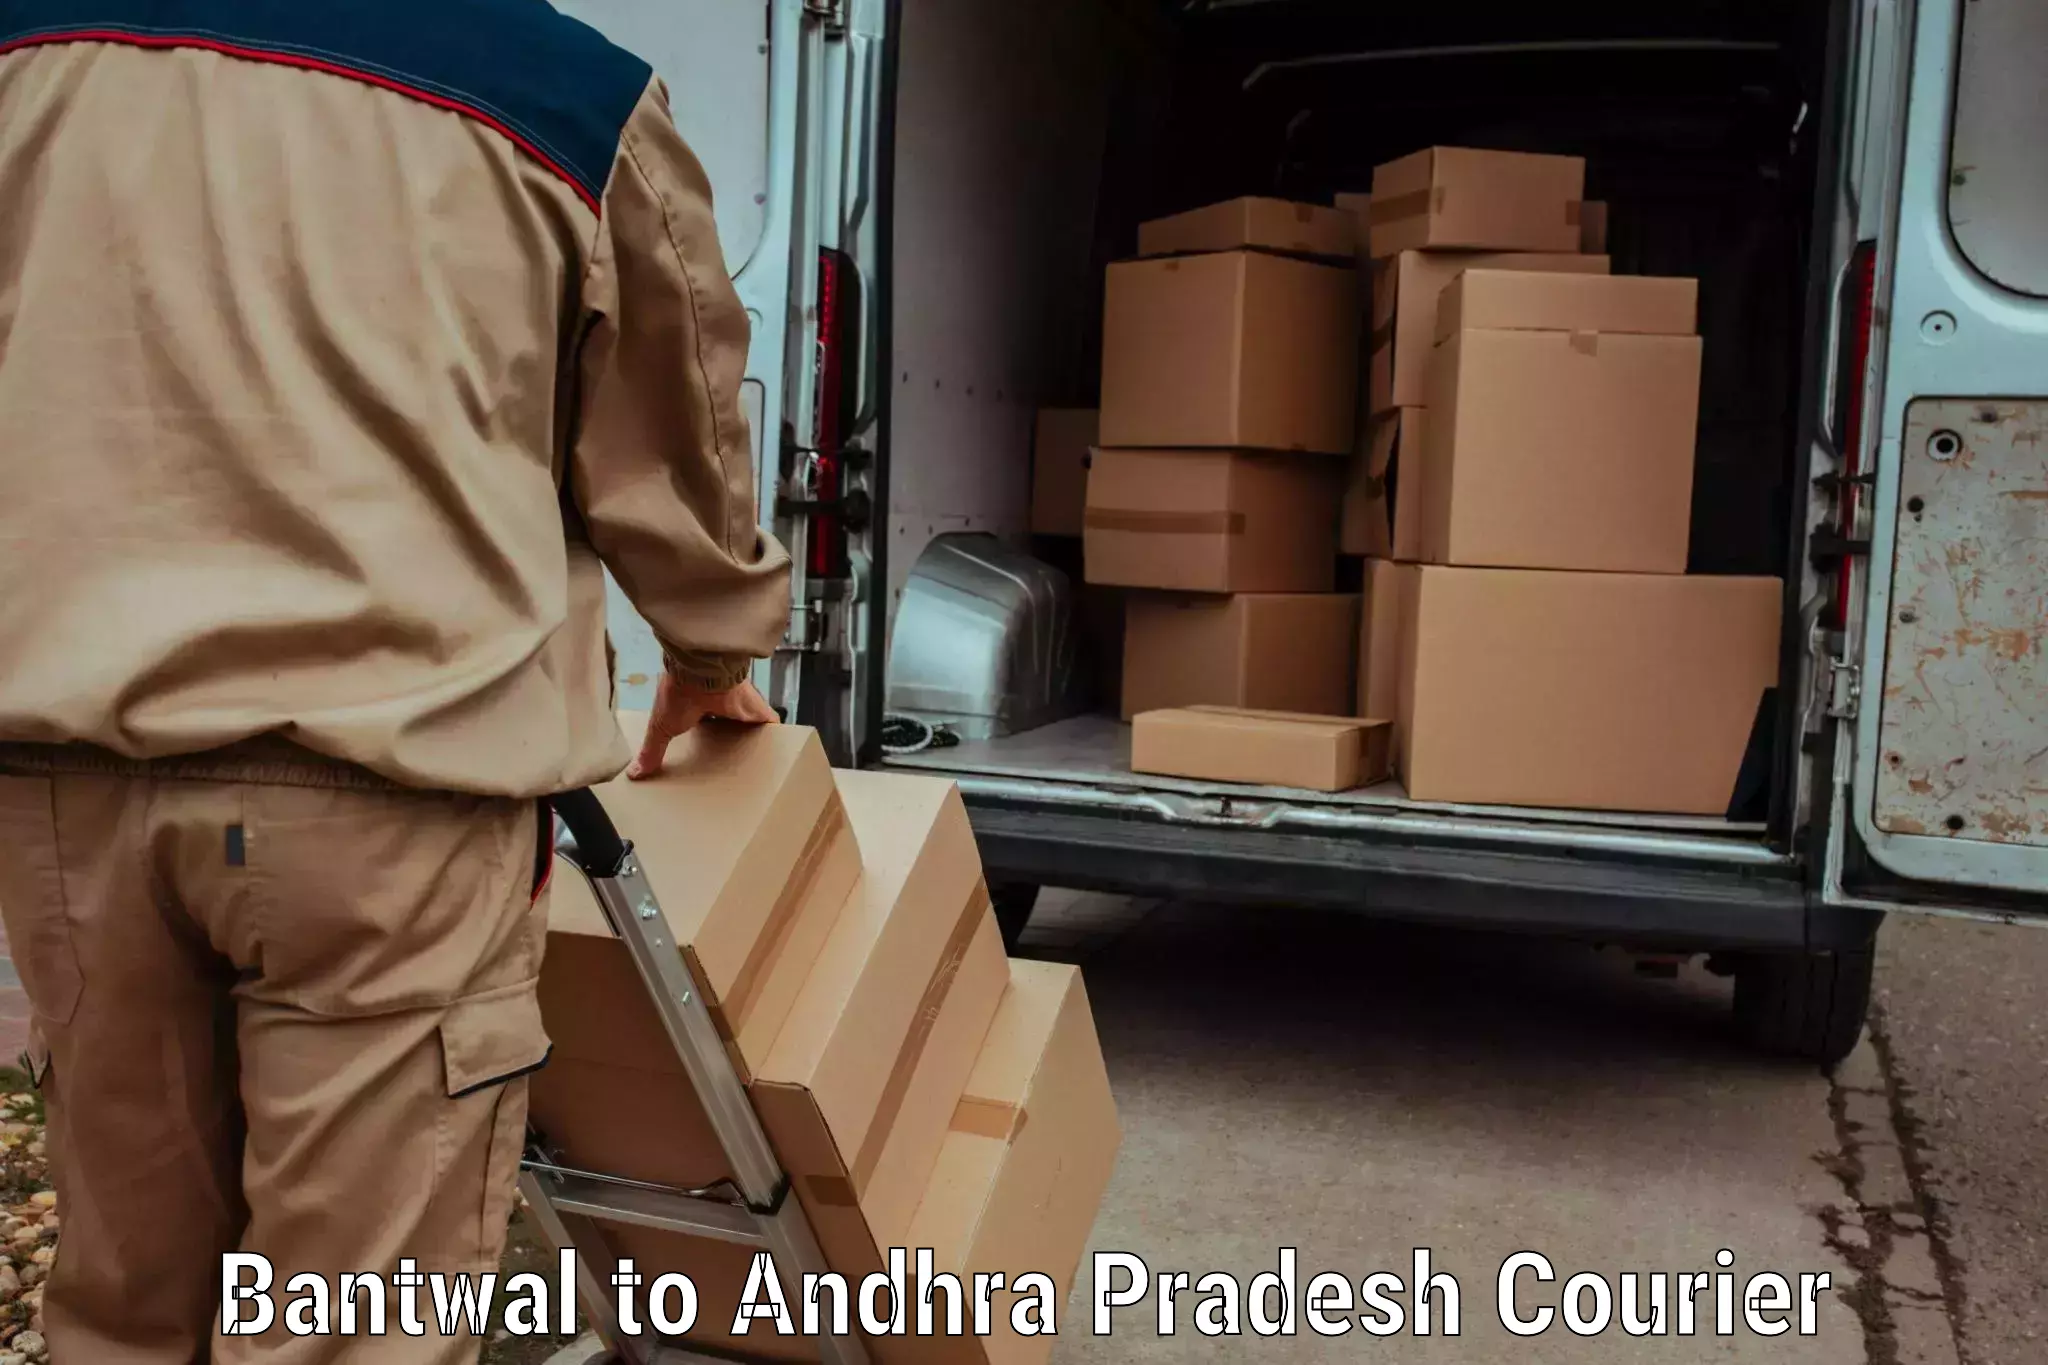 Modern delivery technologies in Bantwal to Puttur Tirupati